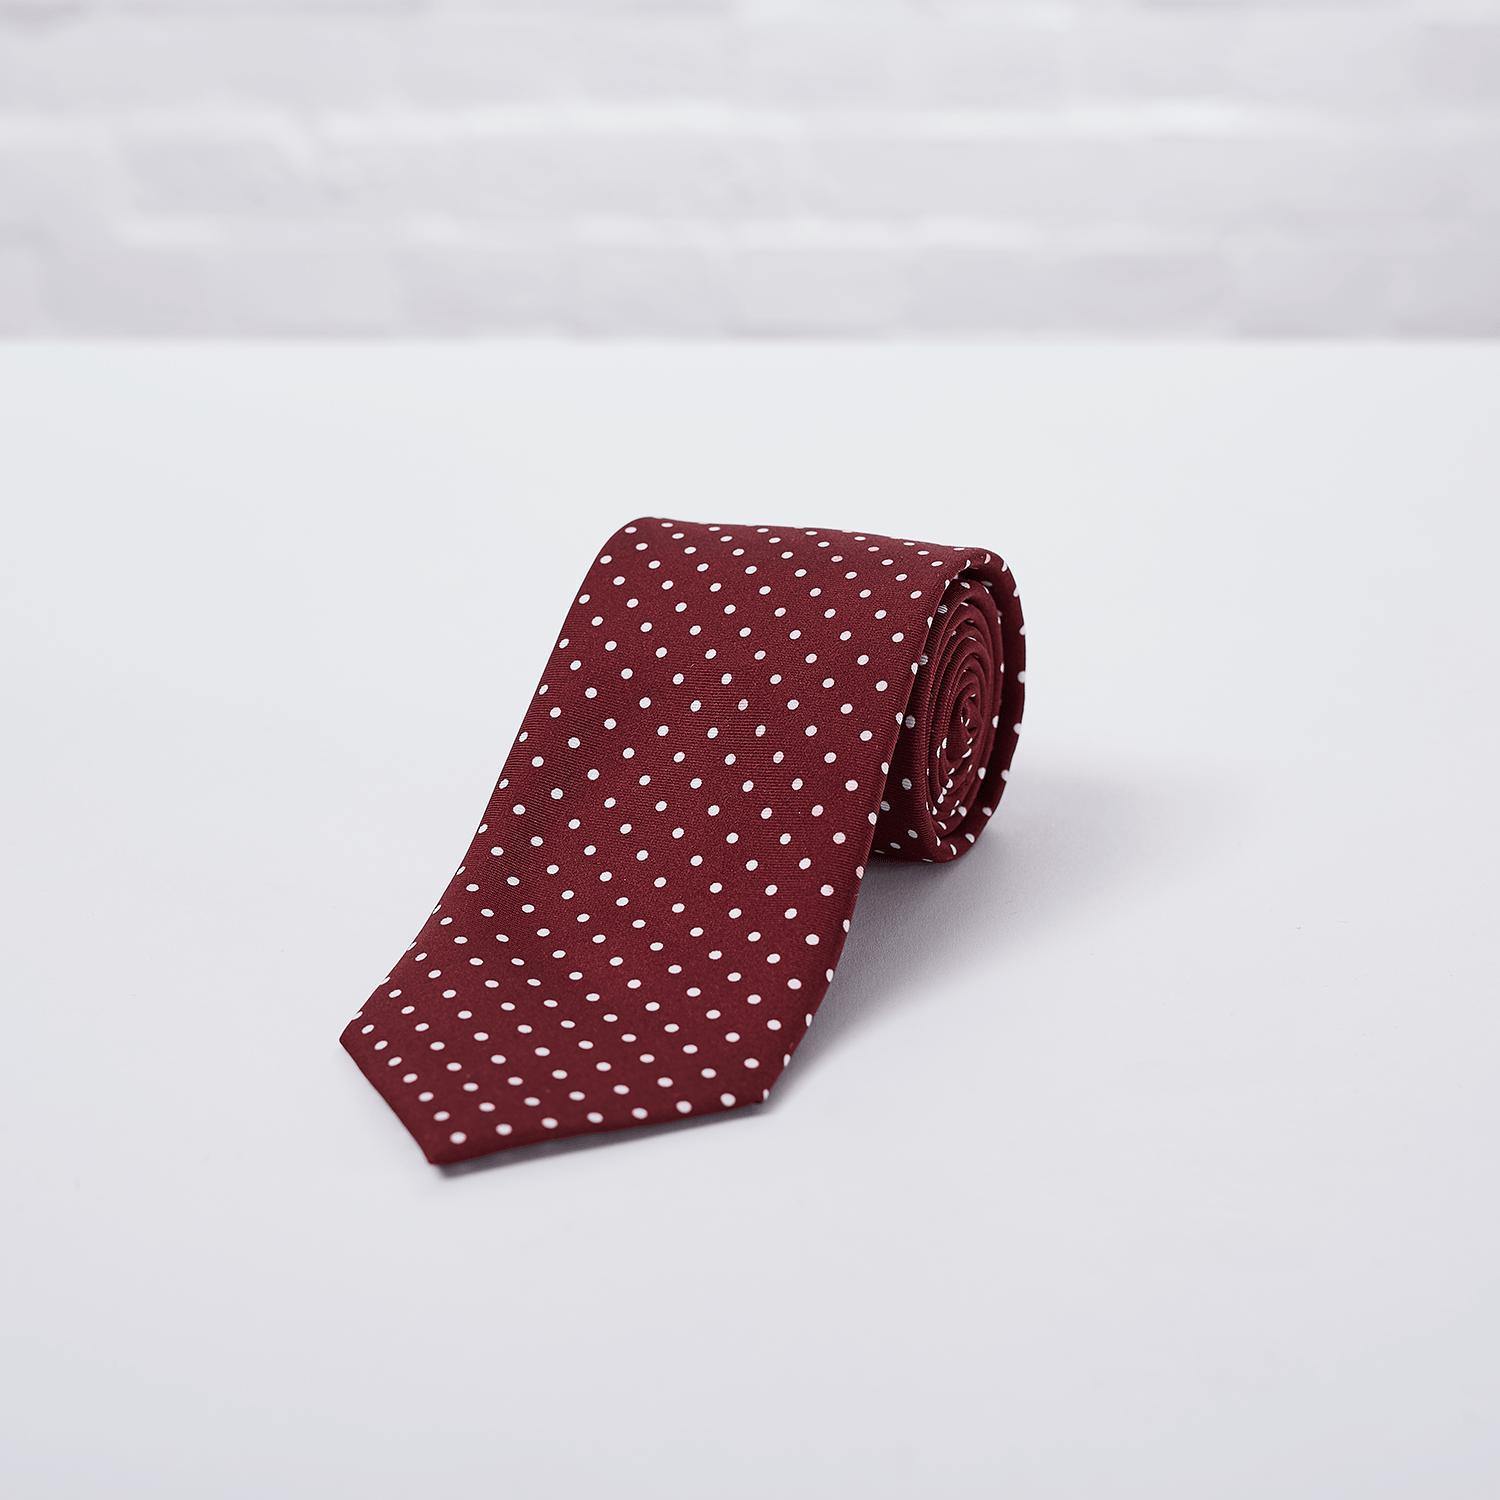 Burgundy Small Spot Printed Silk Tie Hand Finished - British Made